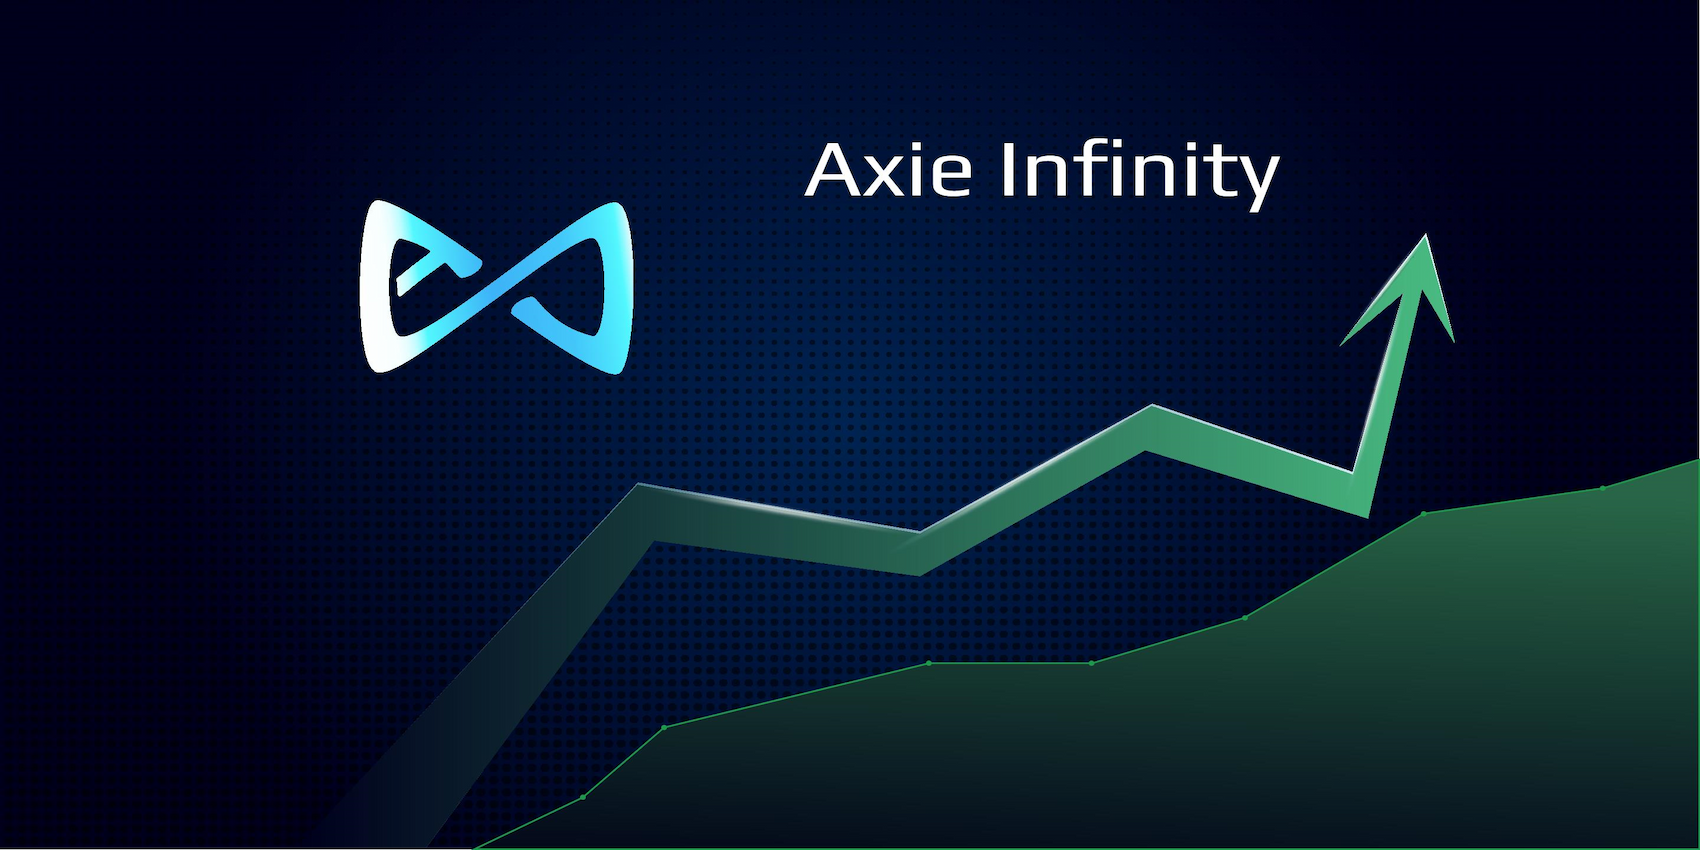 AXS price spiked 56% in two days, ahead of a Axie Infinity token unlock on Jan 23